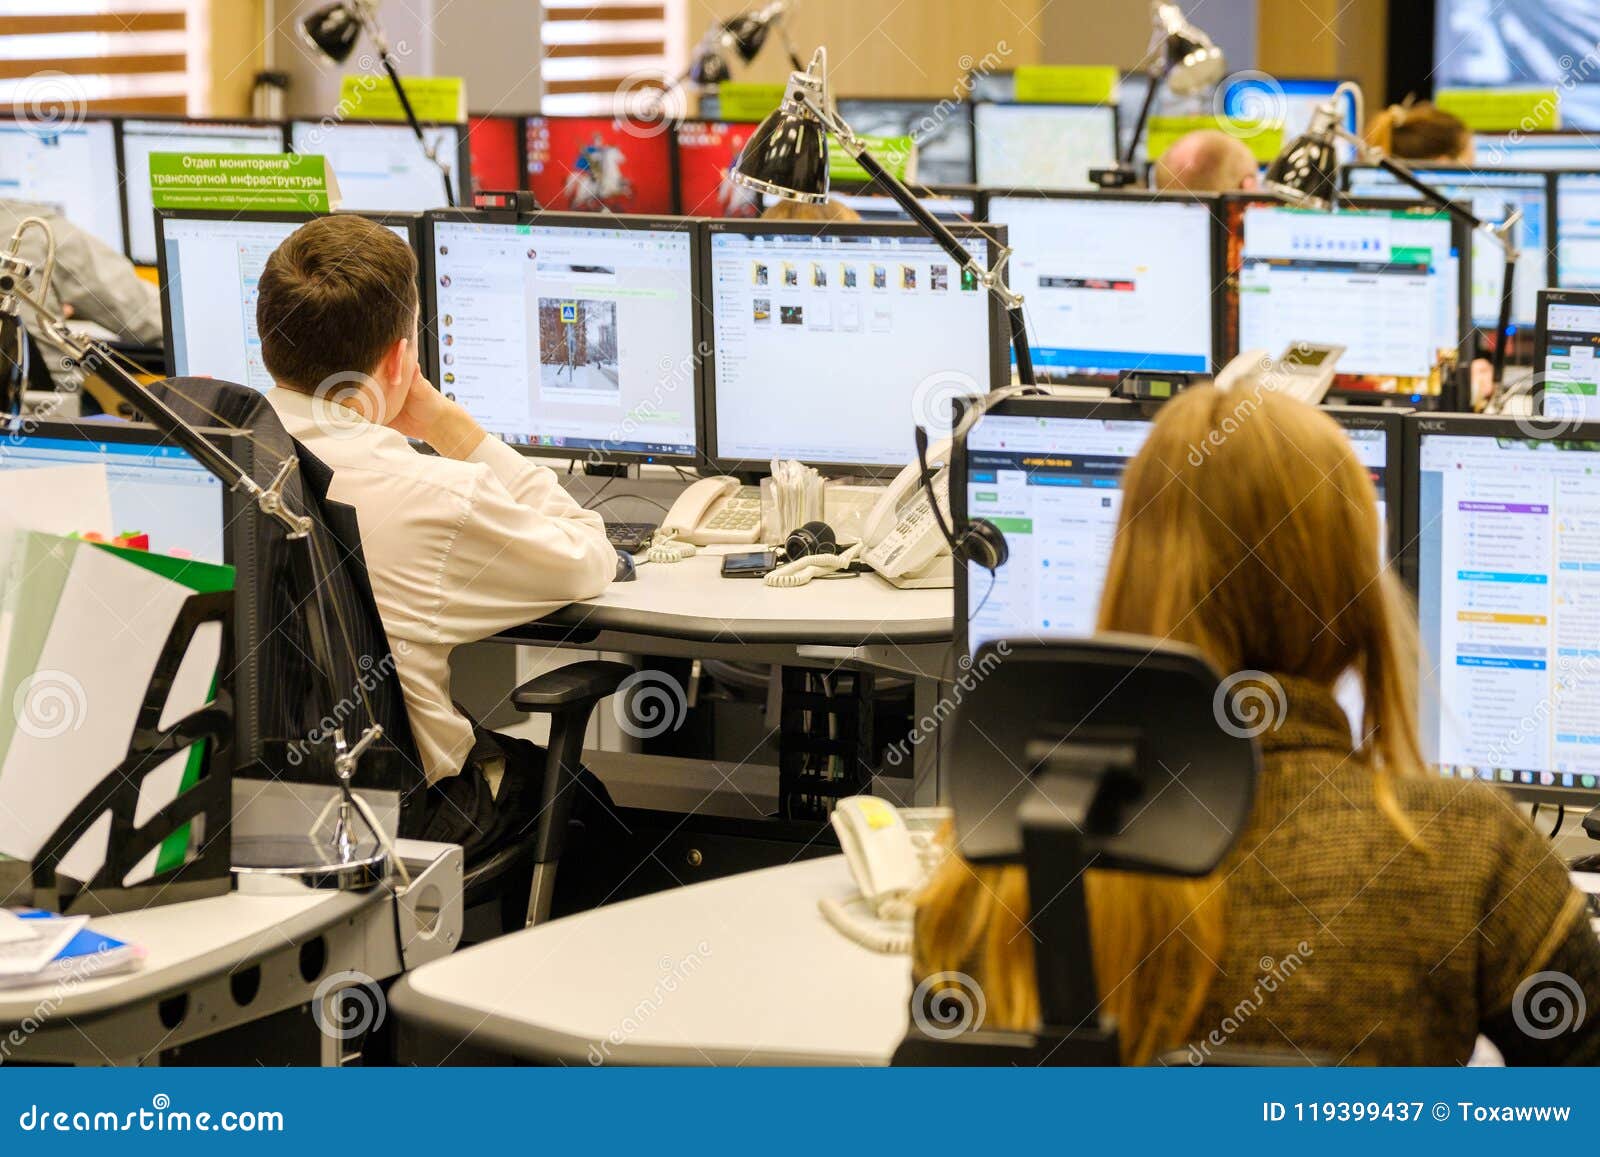 Operators Work In Road Traffic Control Center Editorial Photography Image of transportation